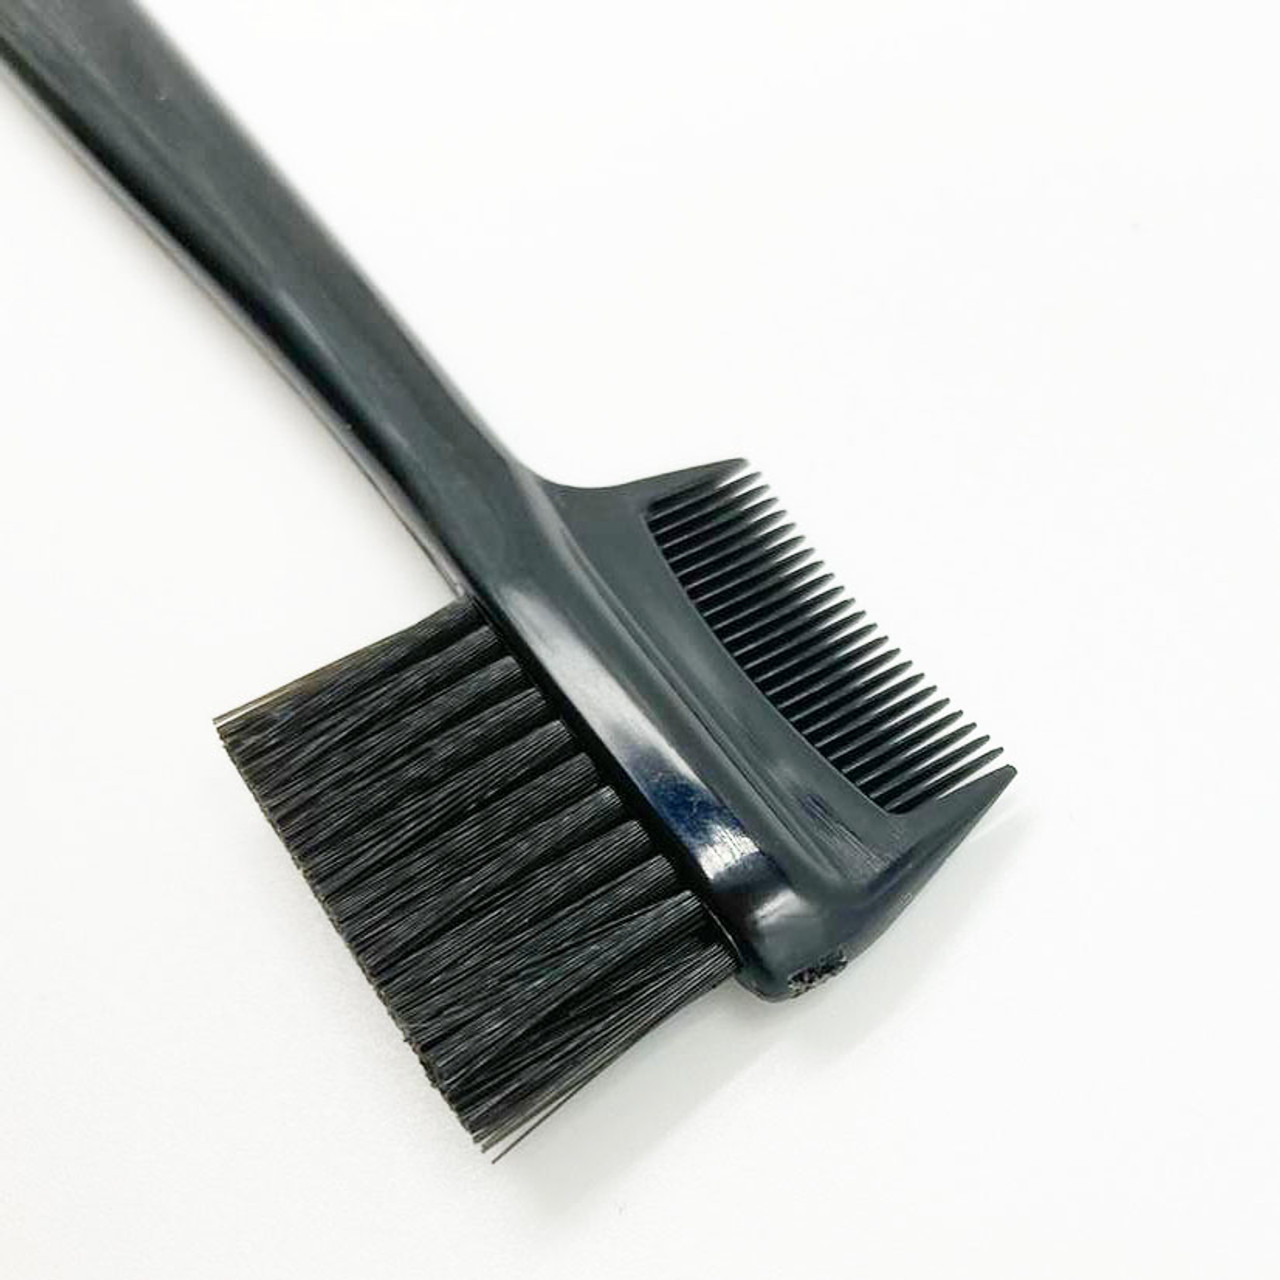 The Brow Brush & Comb is pictured, it a comb on one side and on the back of the comb is a nylon brush with dense bristles. It has a long black handle with the Mary Quant Daisy printed on it.